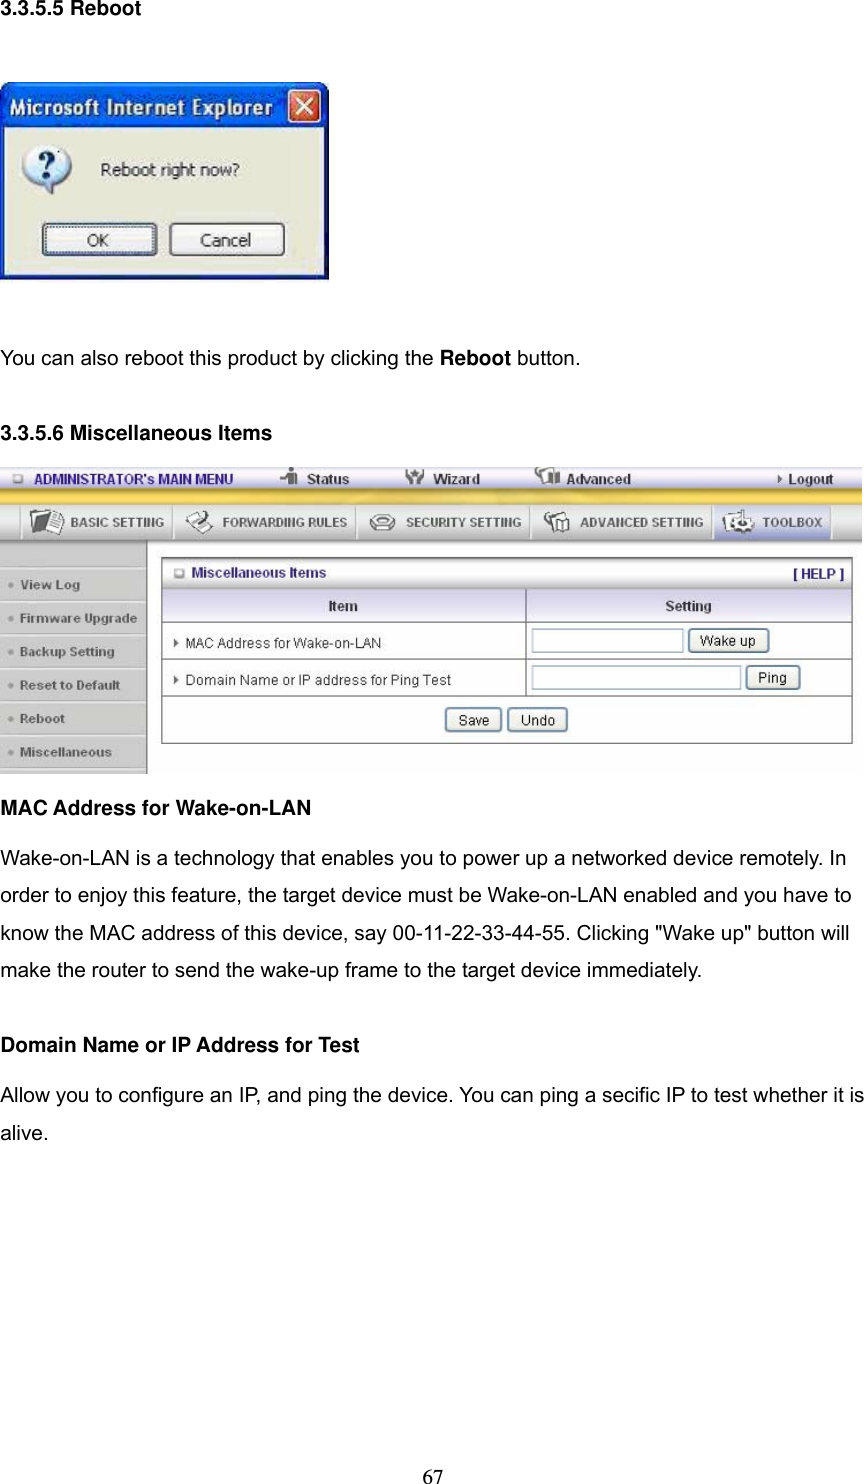  673.3.5.5 Reboot    You can also reboot this product by clicking the Reboot button.  3.3.5.6 Miscellaneous Items  MAC Address for Wake-on-LAN Wake-on-LAN is a technology that enables you to power up a networked device remotely. In order to enjoy this feature, the target device must be Wake-on-LAN enabled and you have to know the MAC address of this device, say 00-11-22-33-44-55. Clicking &quot;Wake up&quot; button will make the router to send the wake-up frame to the target device immediately.    Domain Name or IP Address for Test Allow you to configure an IP, and ping the device. You can ping a secific IP to test whether it is alive.        